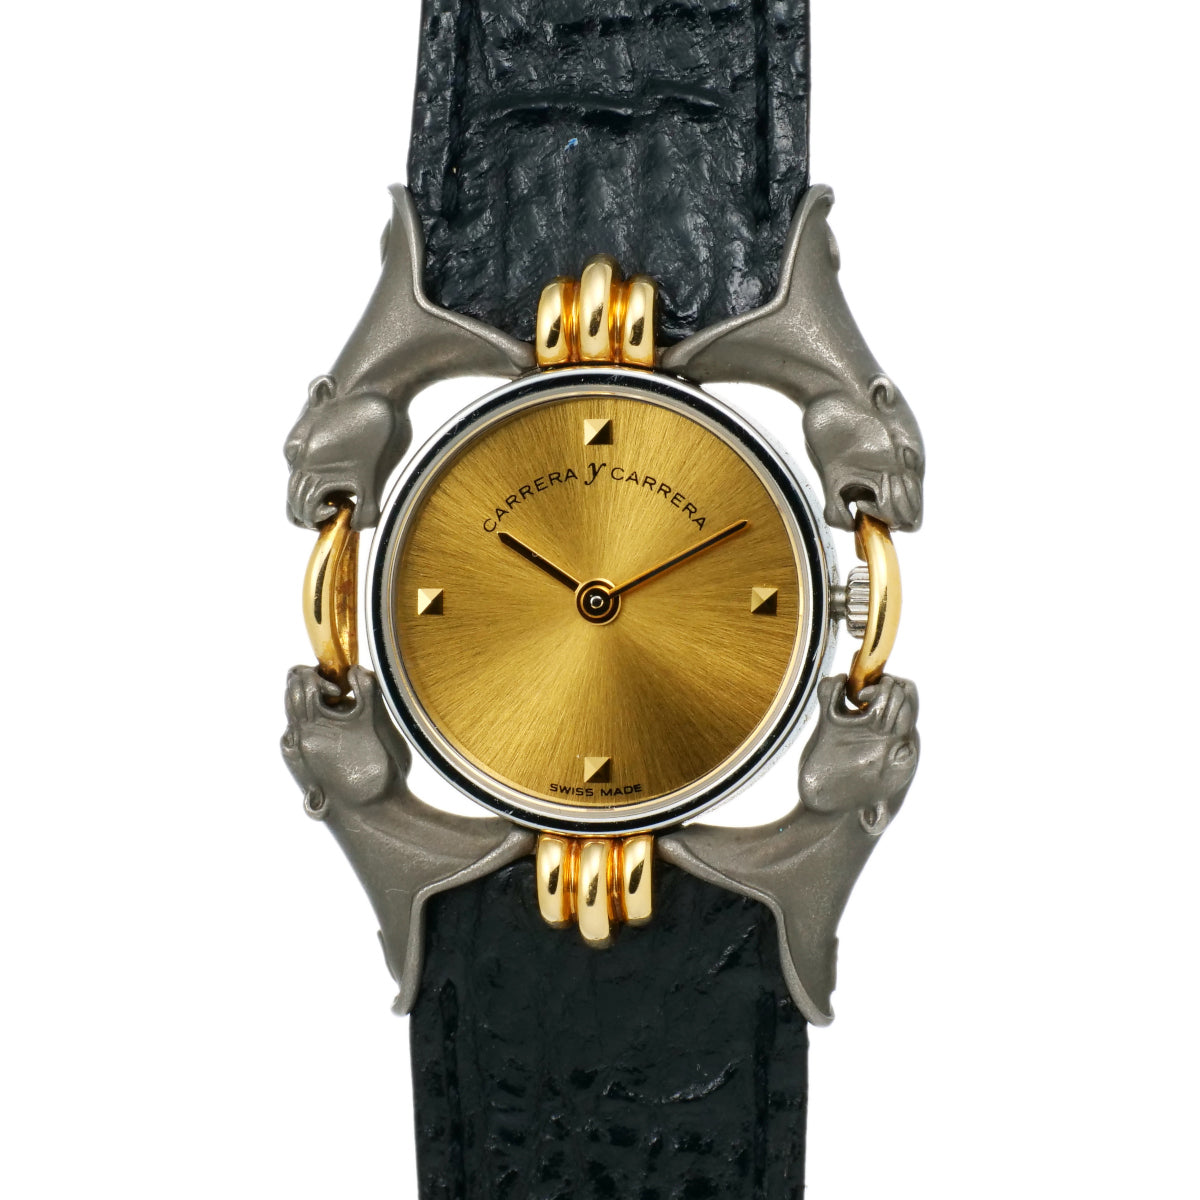 Carrera y Carrera 130 Ladies Watch with Leather & Stainless Steel in Gold 130.0